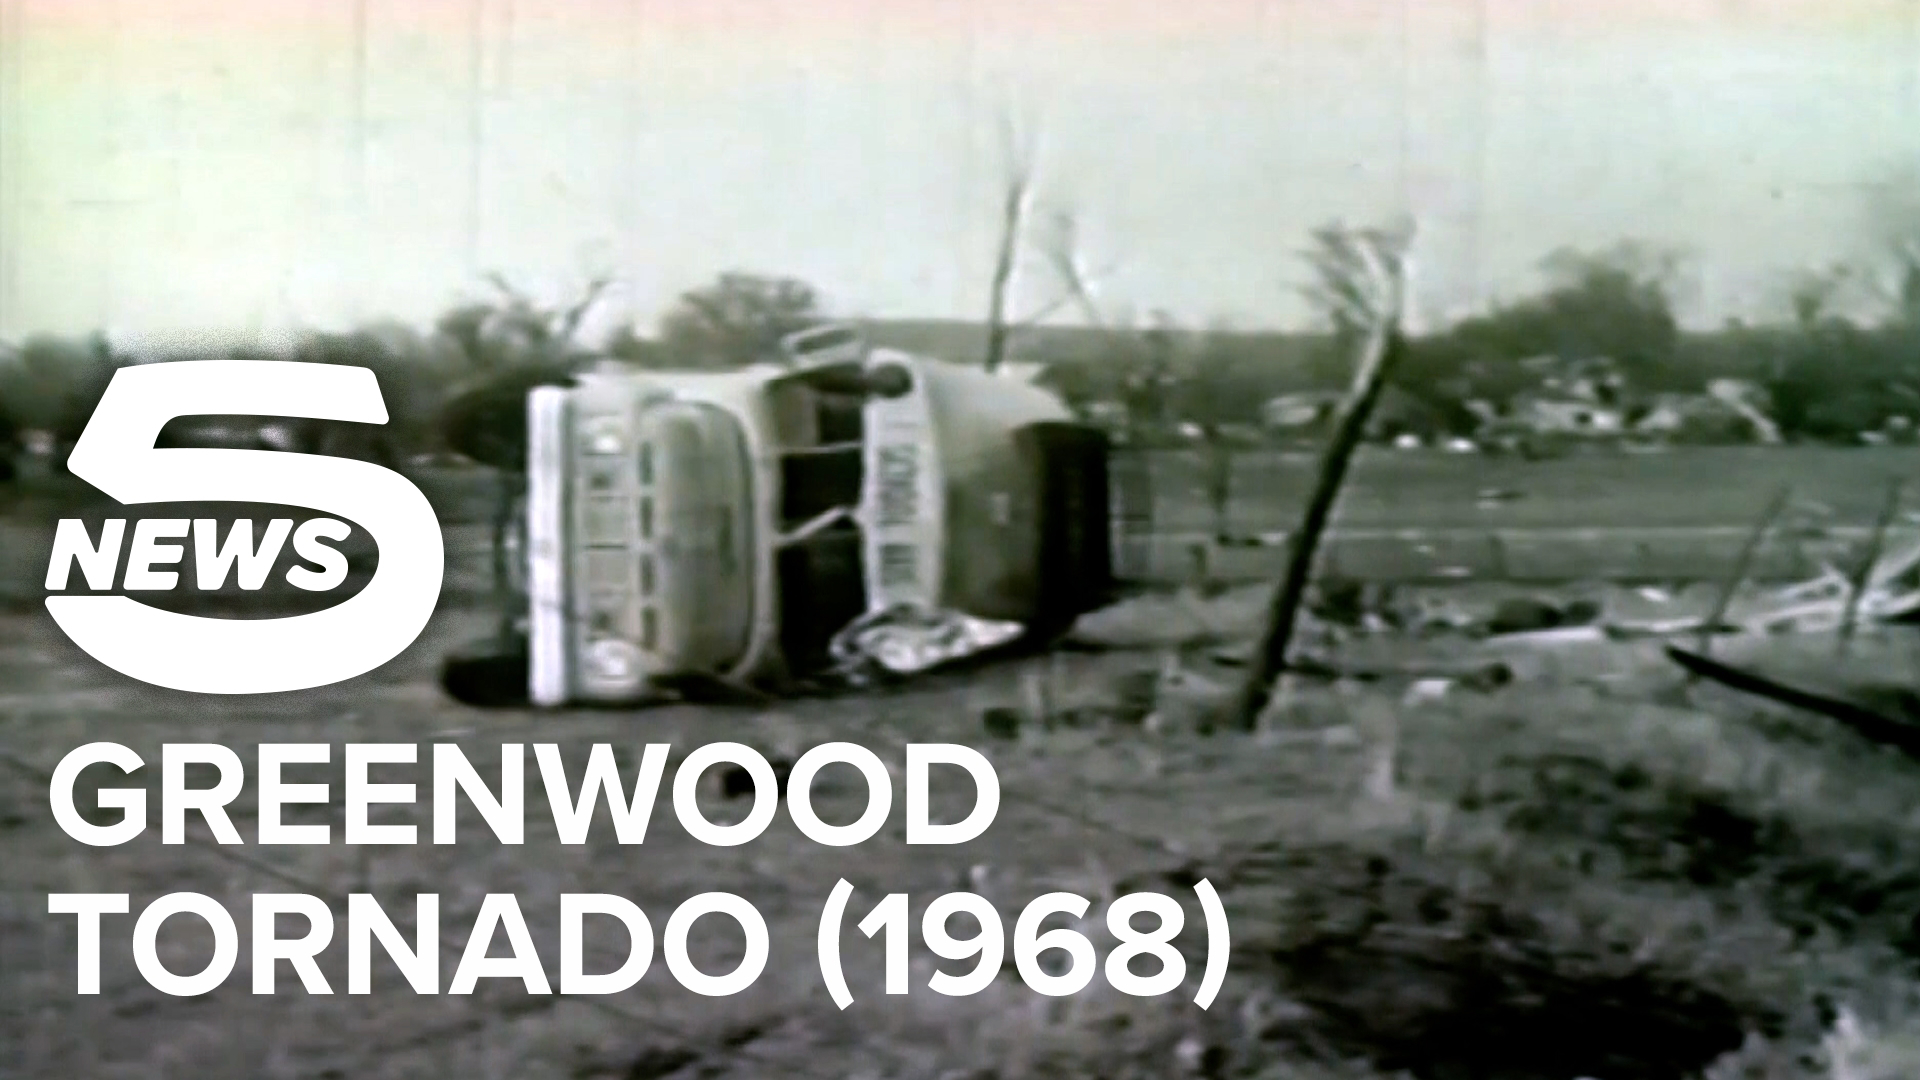 On April 19, 1968, a tornado ripped through the town of Greenwood, Arkansas, killing 13 people over the course of four minutes.